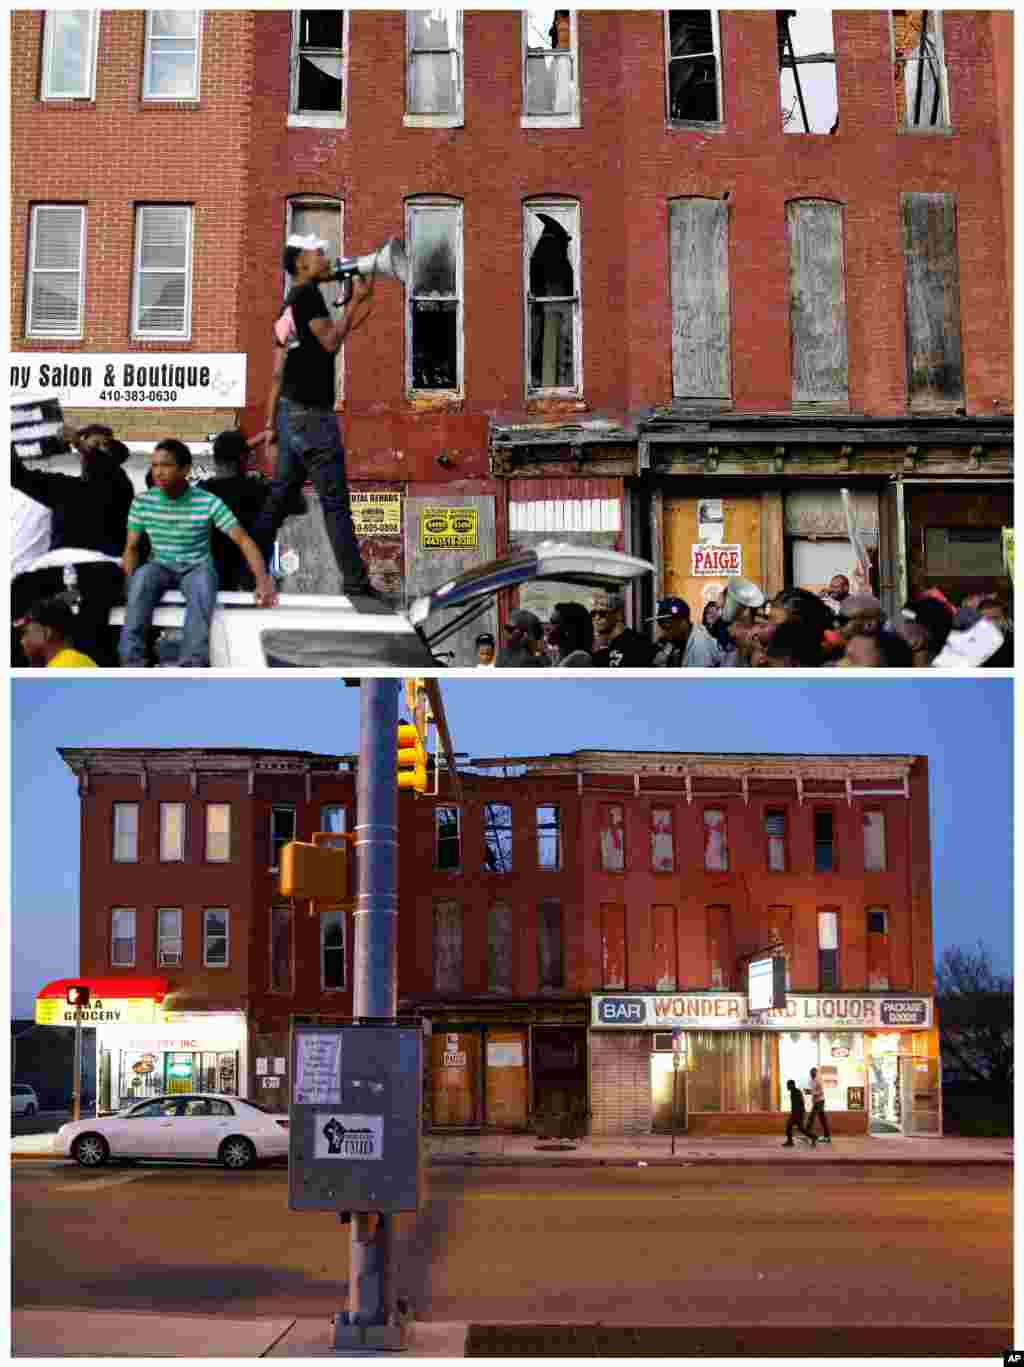 A protest leads marchers in a chant on May 2, 2015 in Baltimore, top, and the same buildings on April 14, 2016.